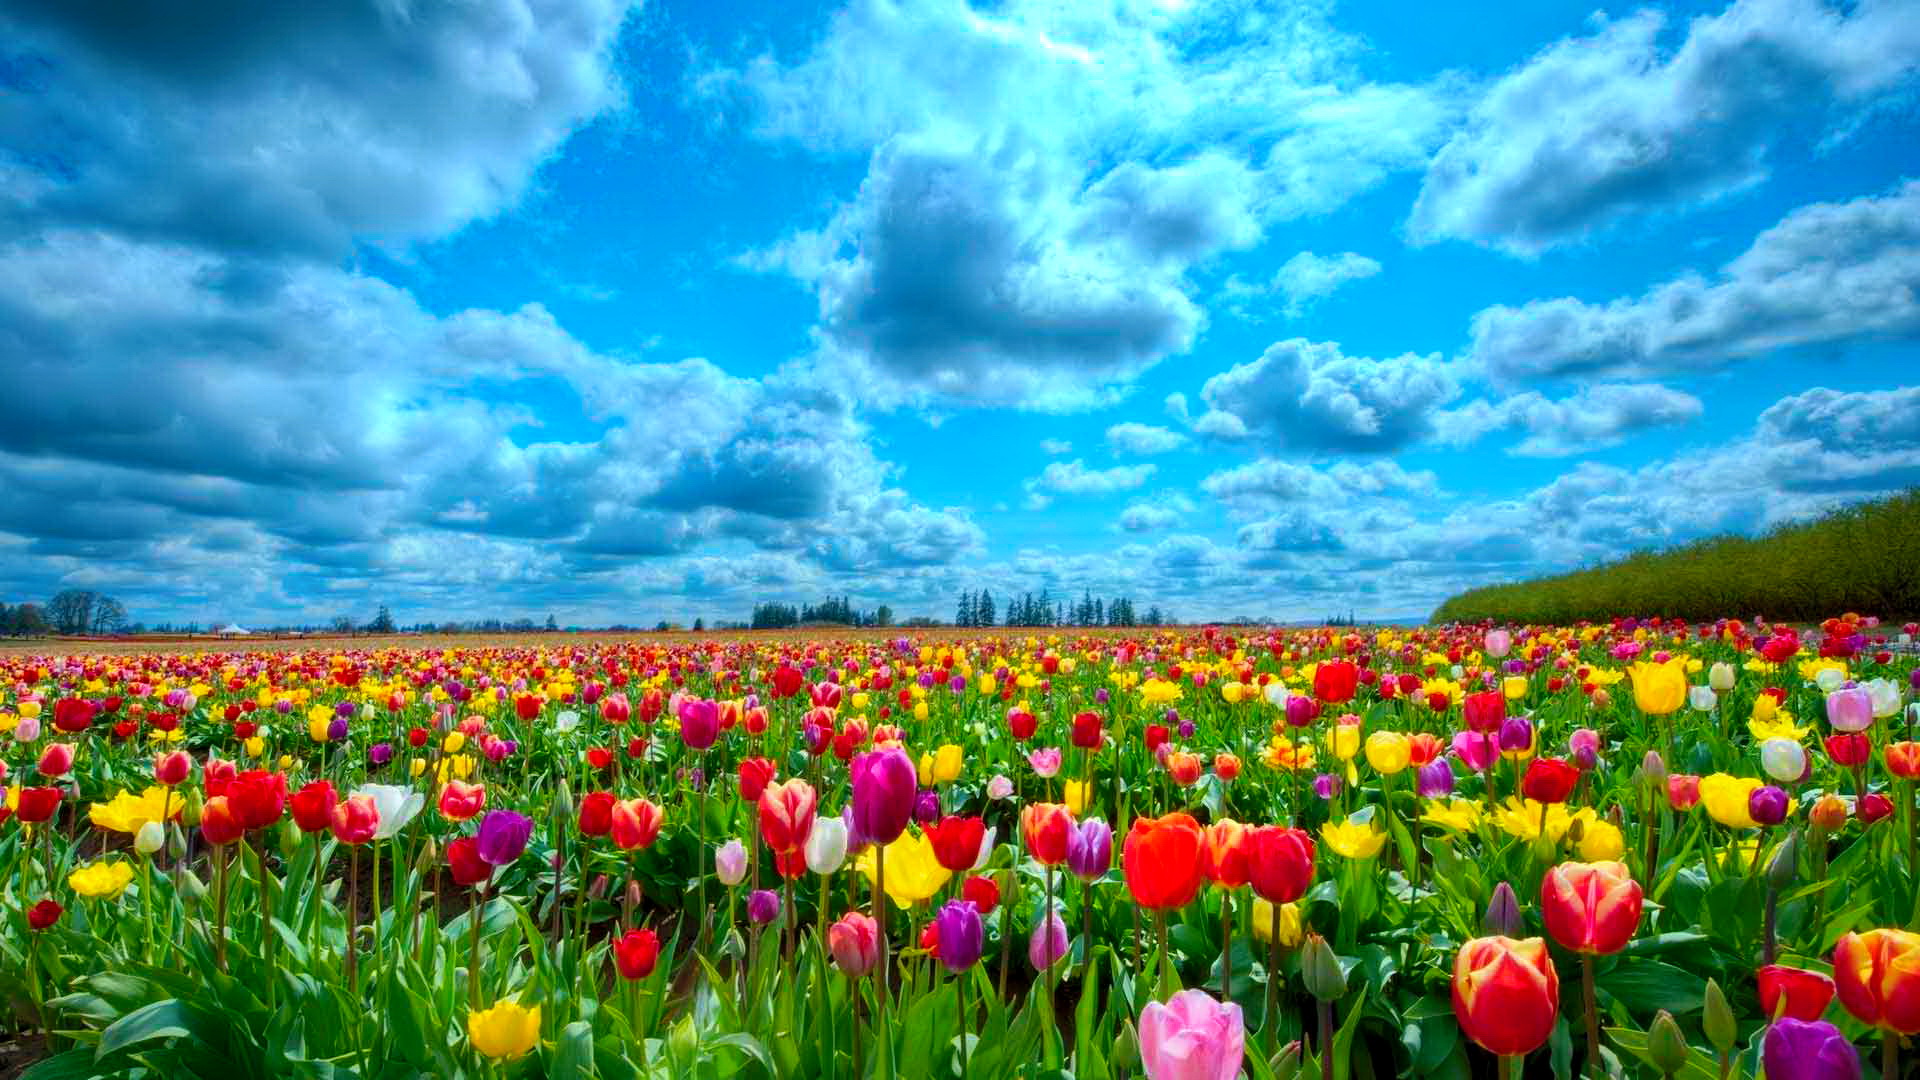 worst hotel in cape town field of tulips free download